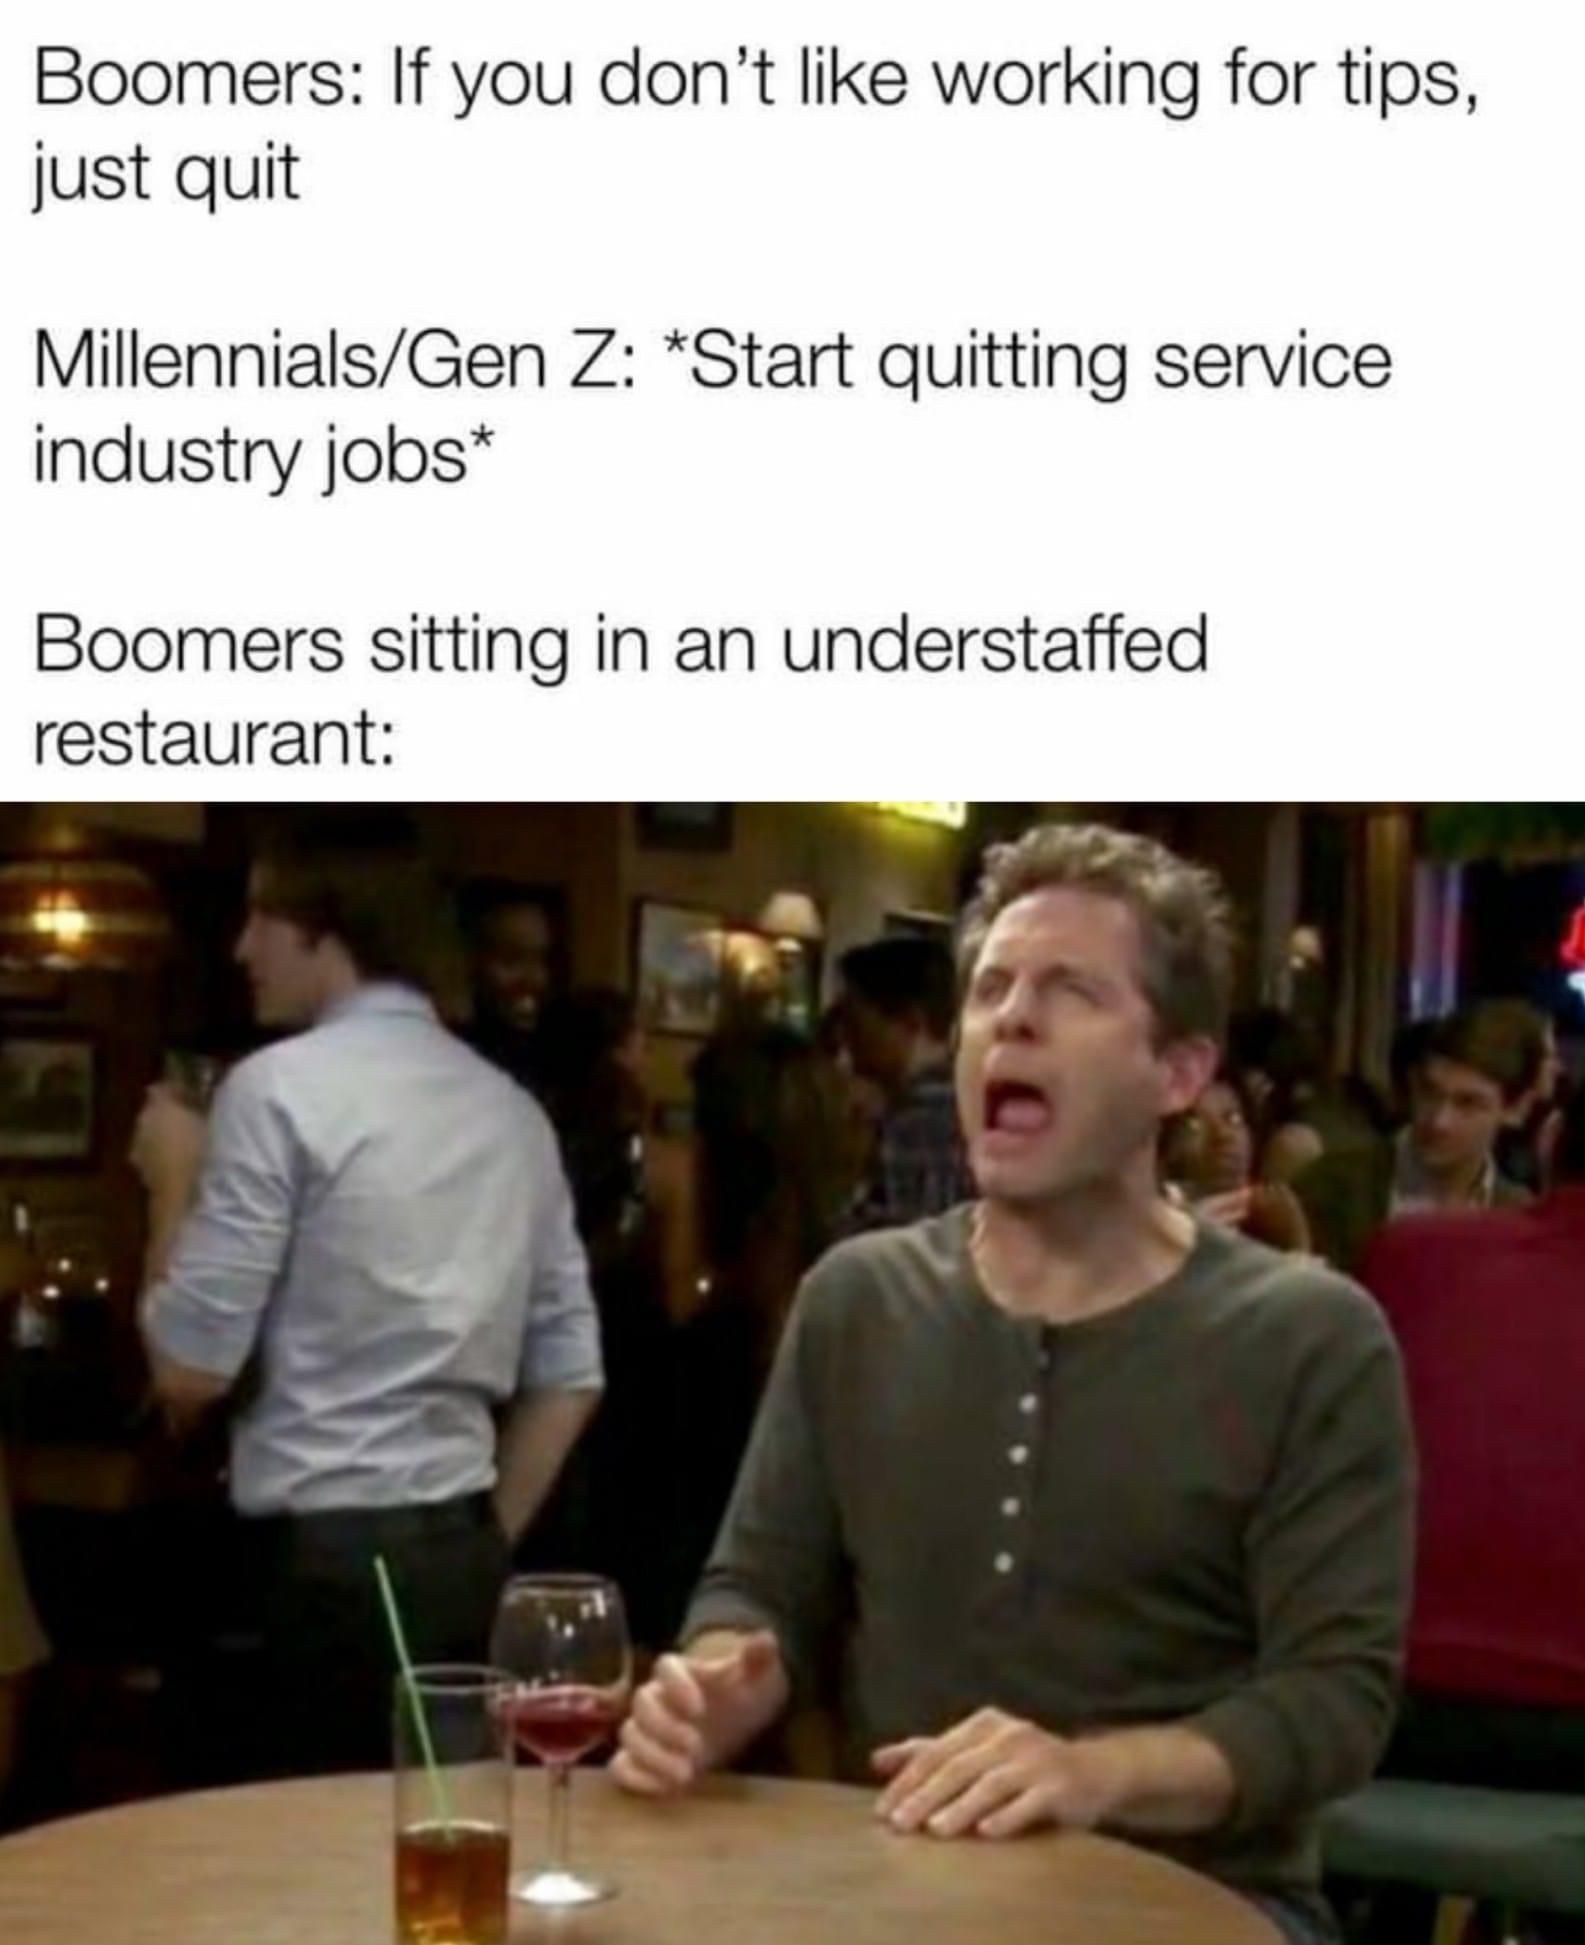 The greedy Boomer restaurant owner is getting pwned